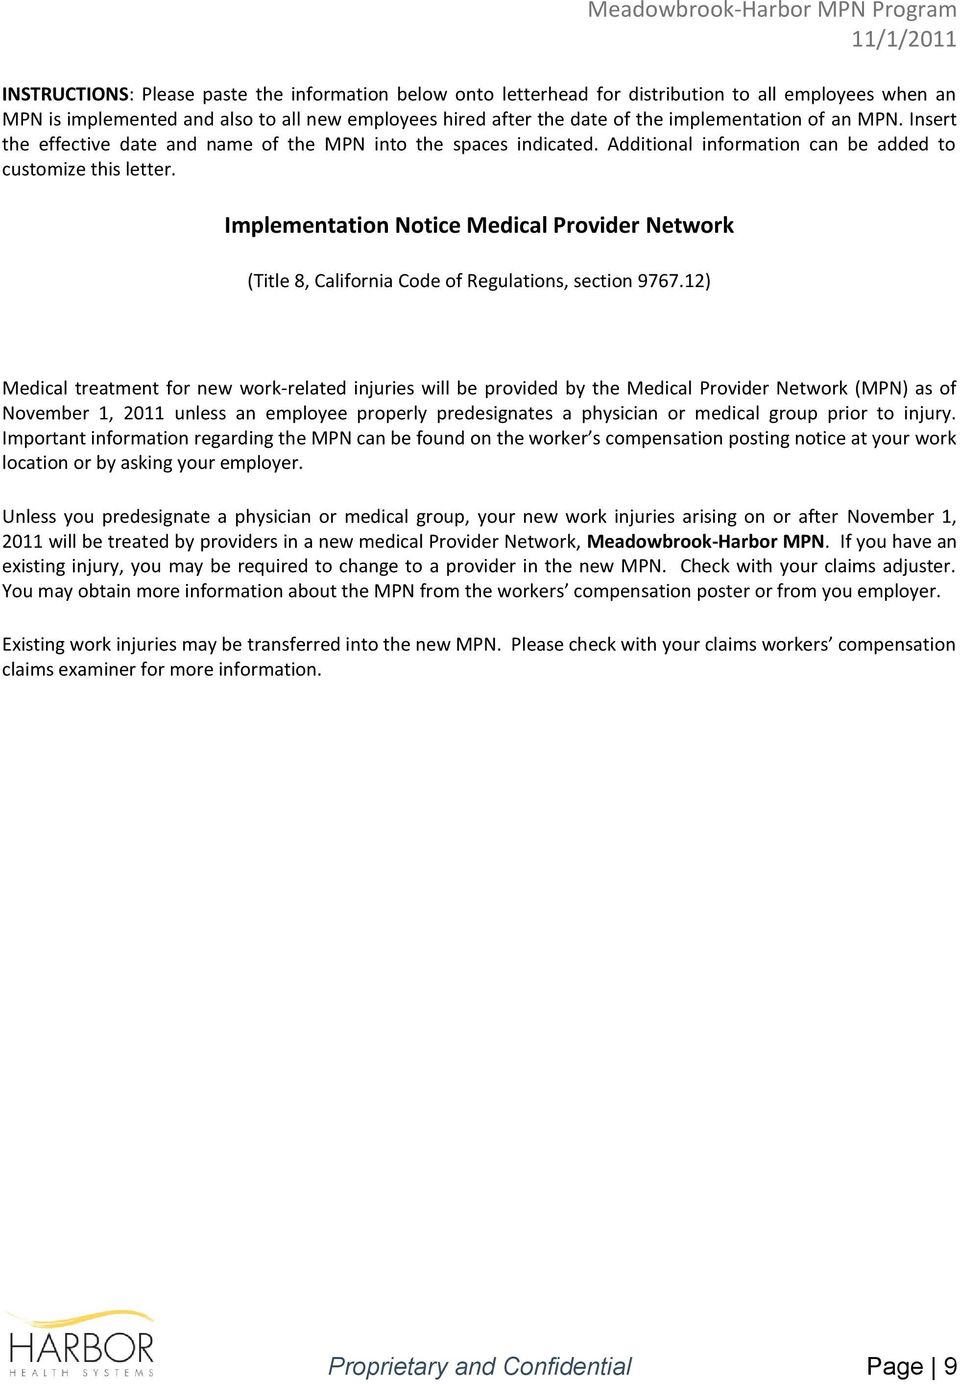 Implementation Notice Medical Provider Network (Title 8, California Code of Regulations, section 9767.